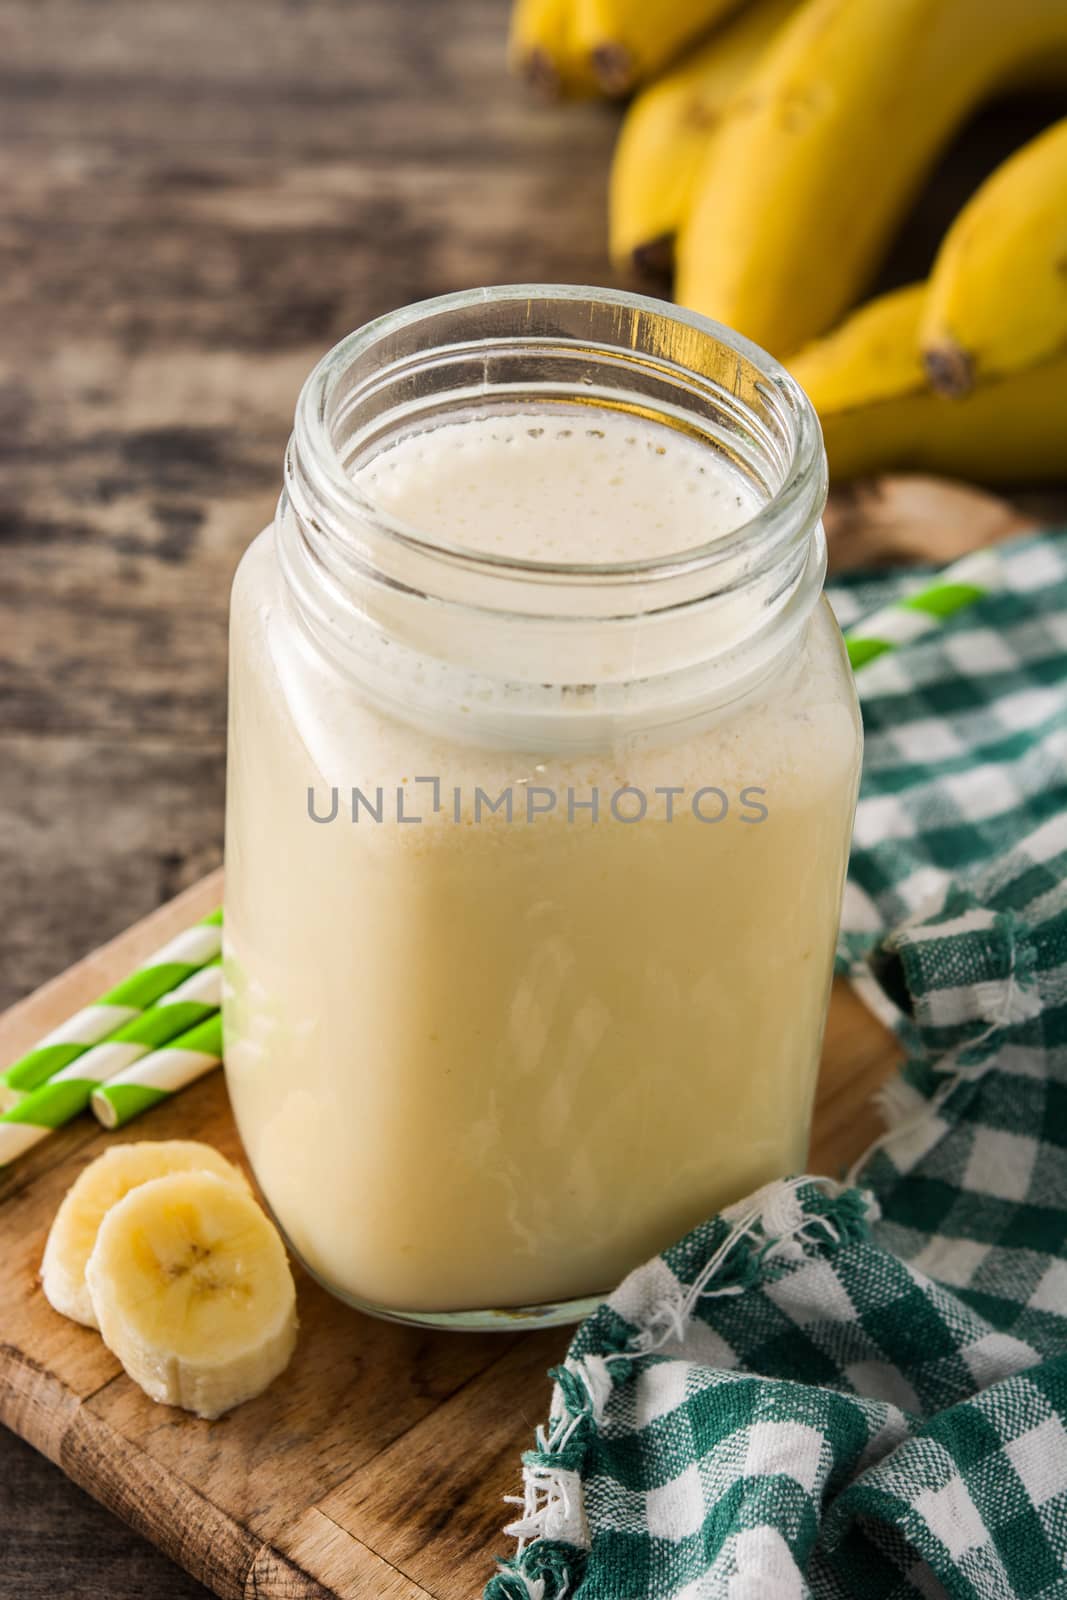 Banana smoothie in glass on wooden table.